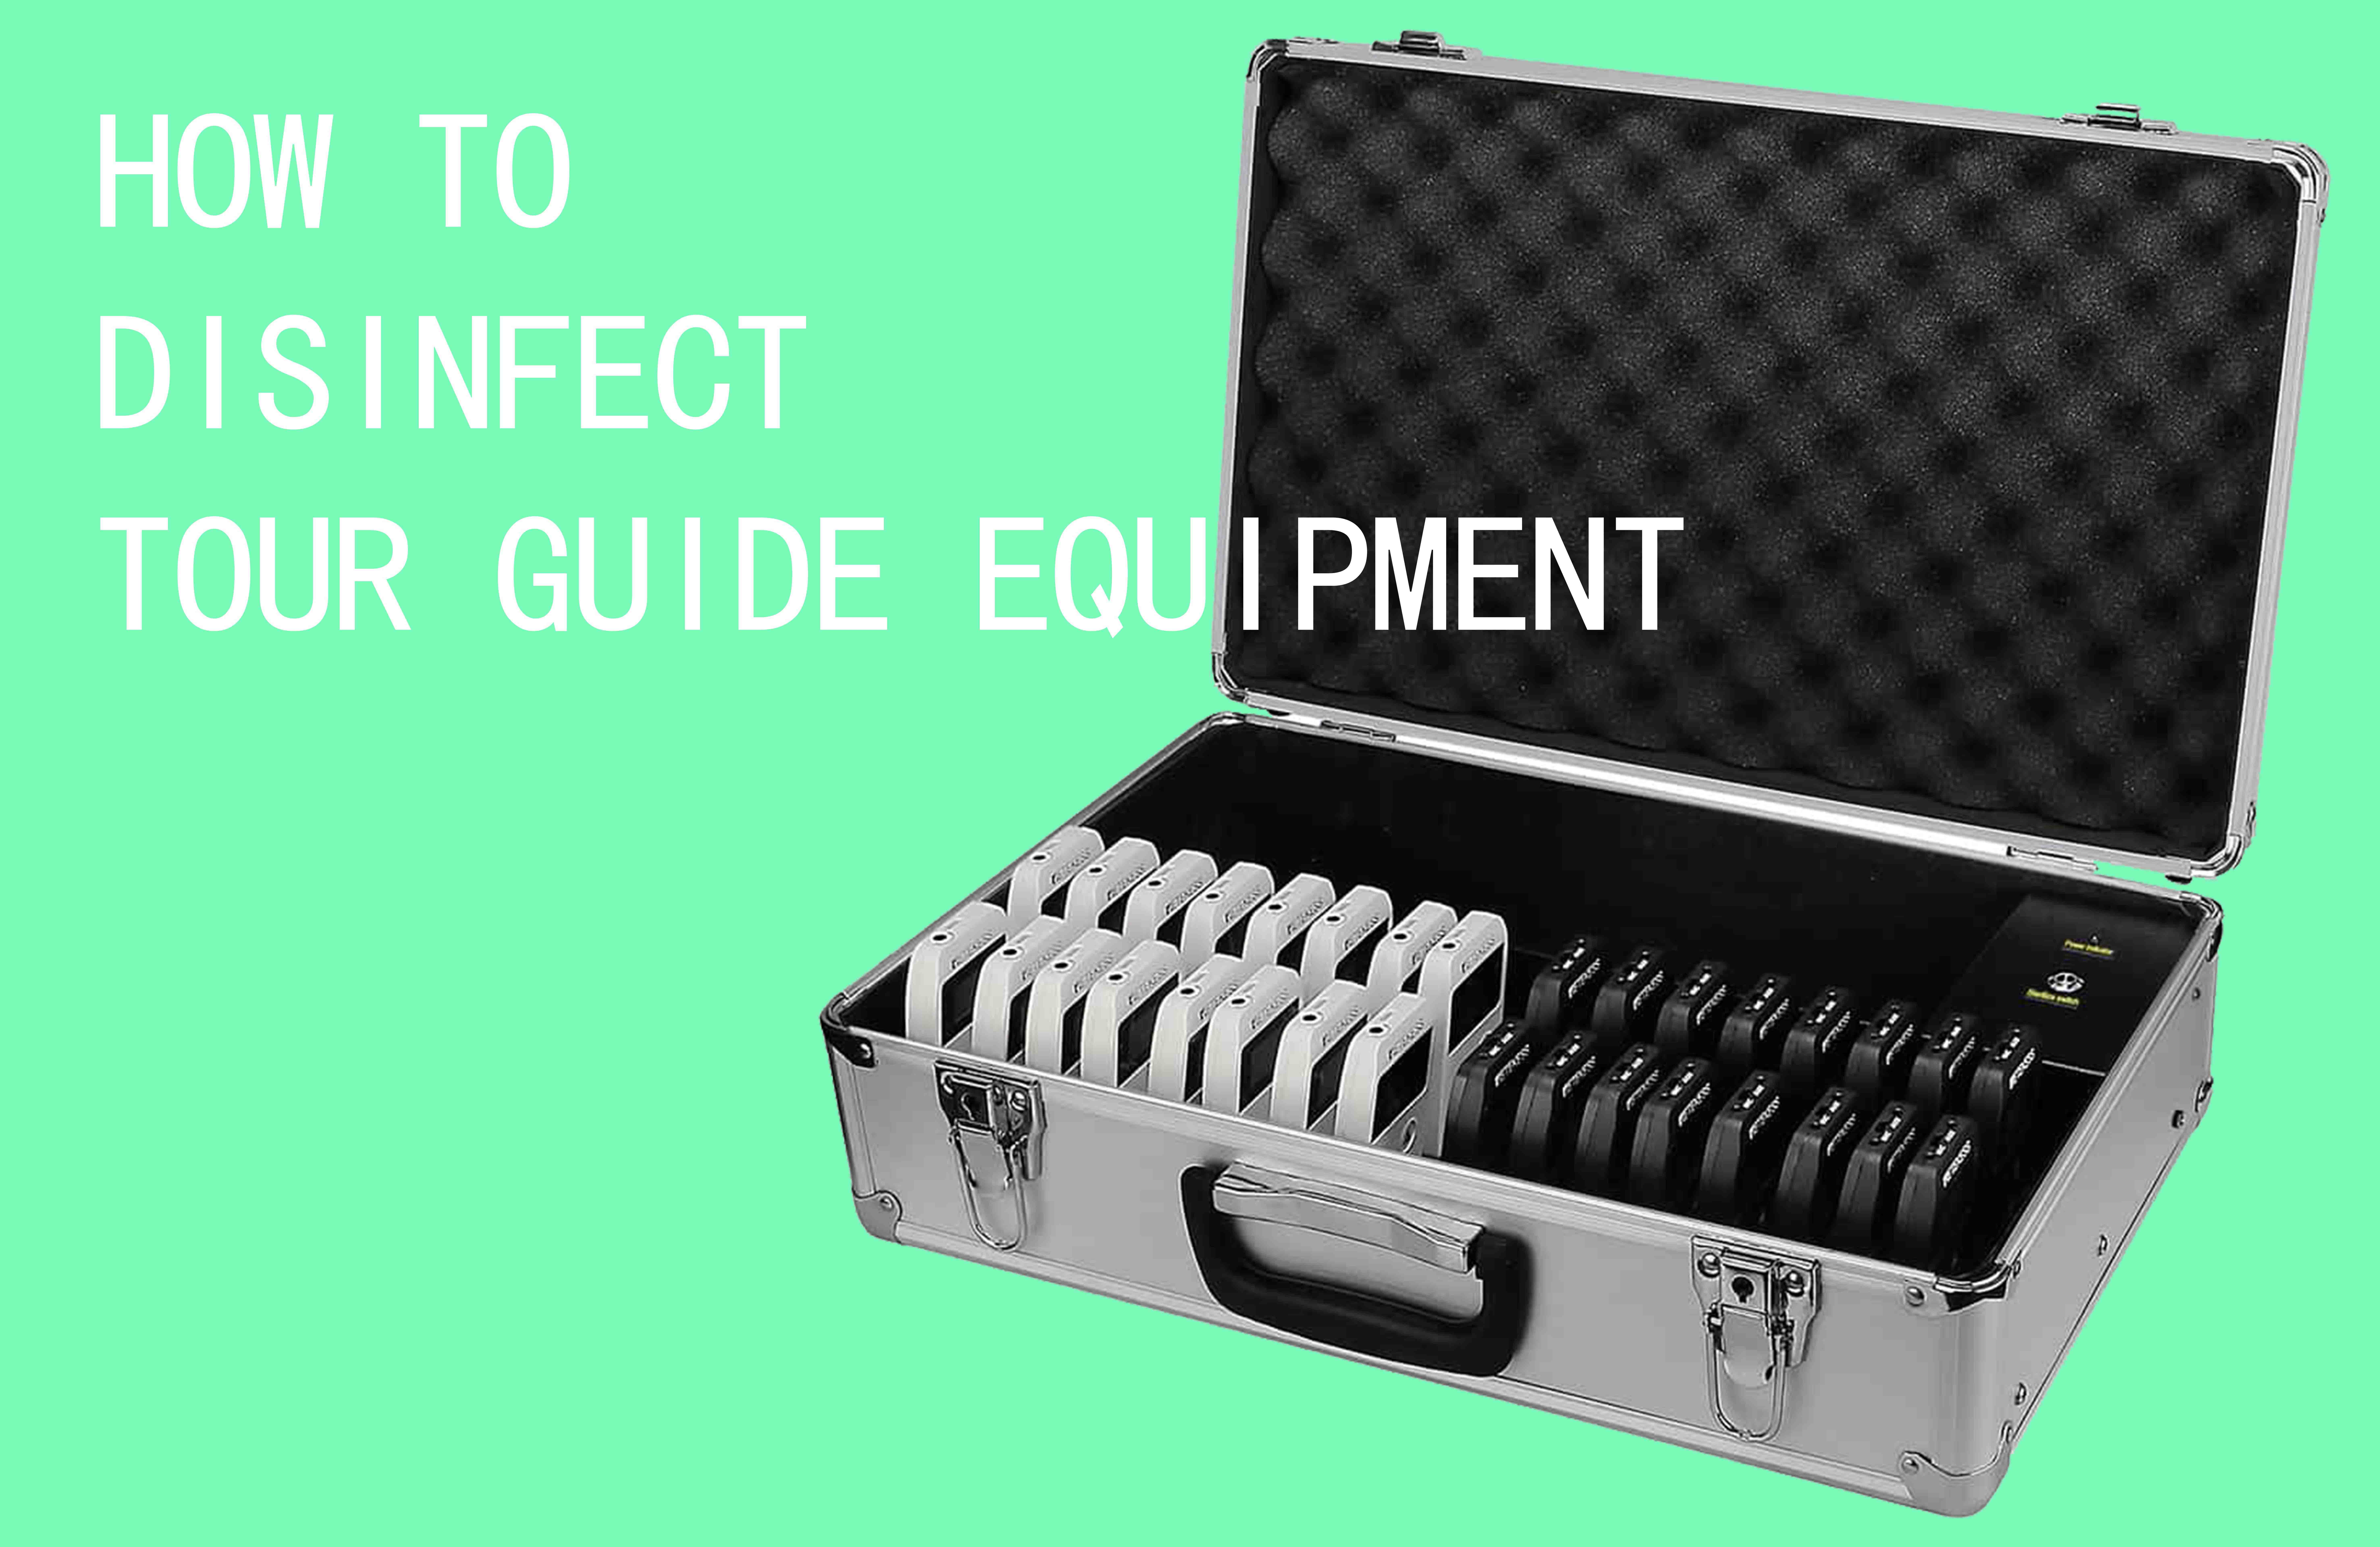 How to Disinfect Tour Guide Equipment